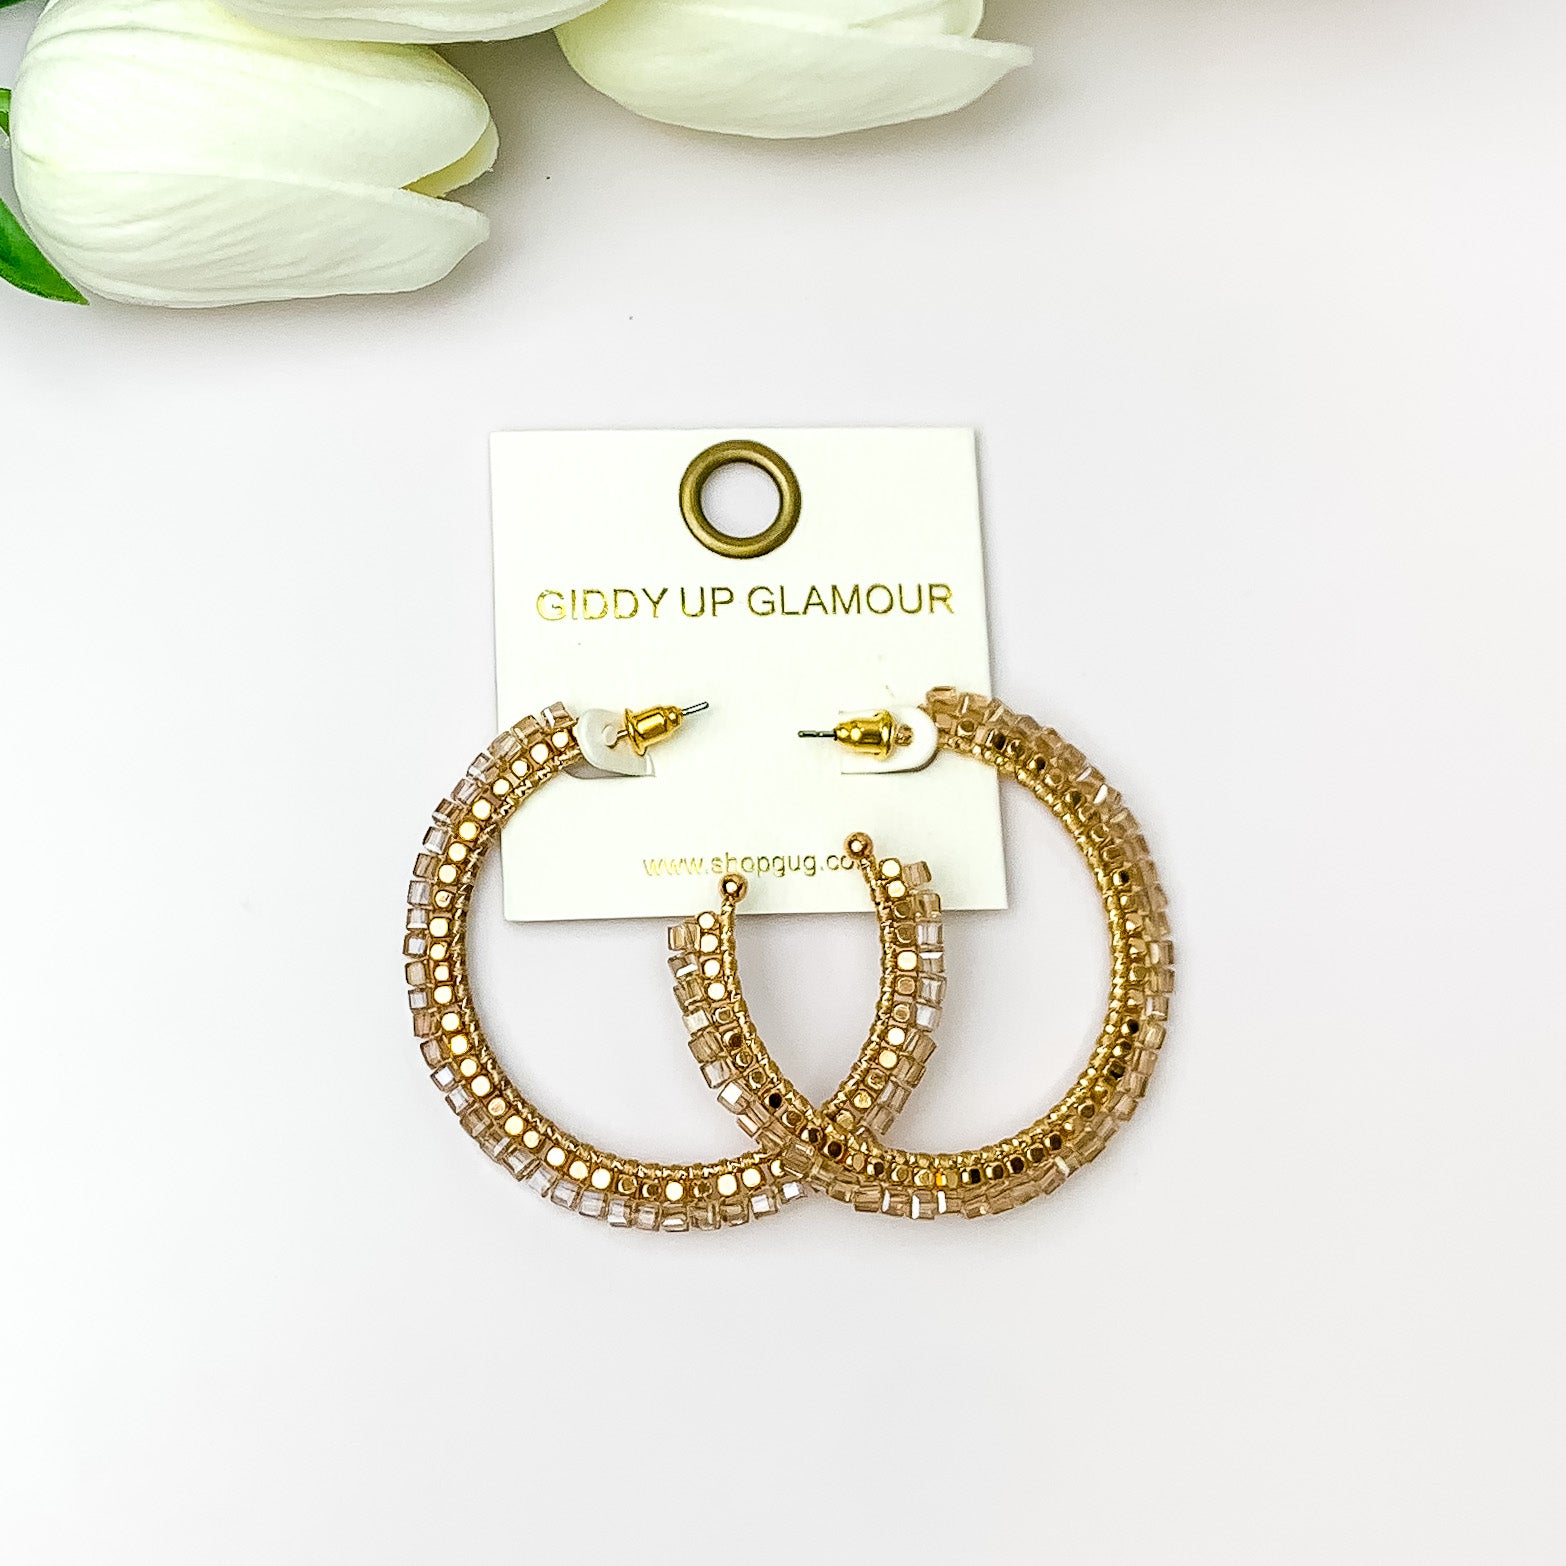 Pictured are circle gold toned hoop earrings with gold beads around it and champagne crystal outline. They are pictured with white flowers on a white background.